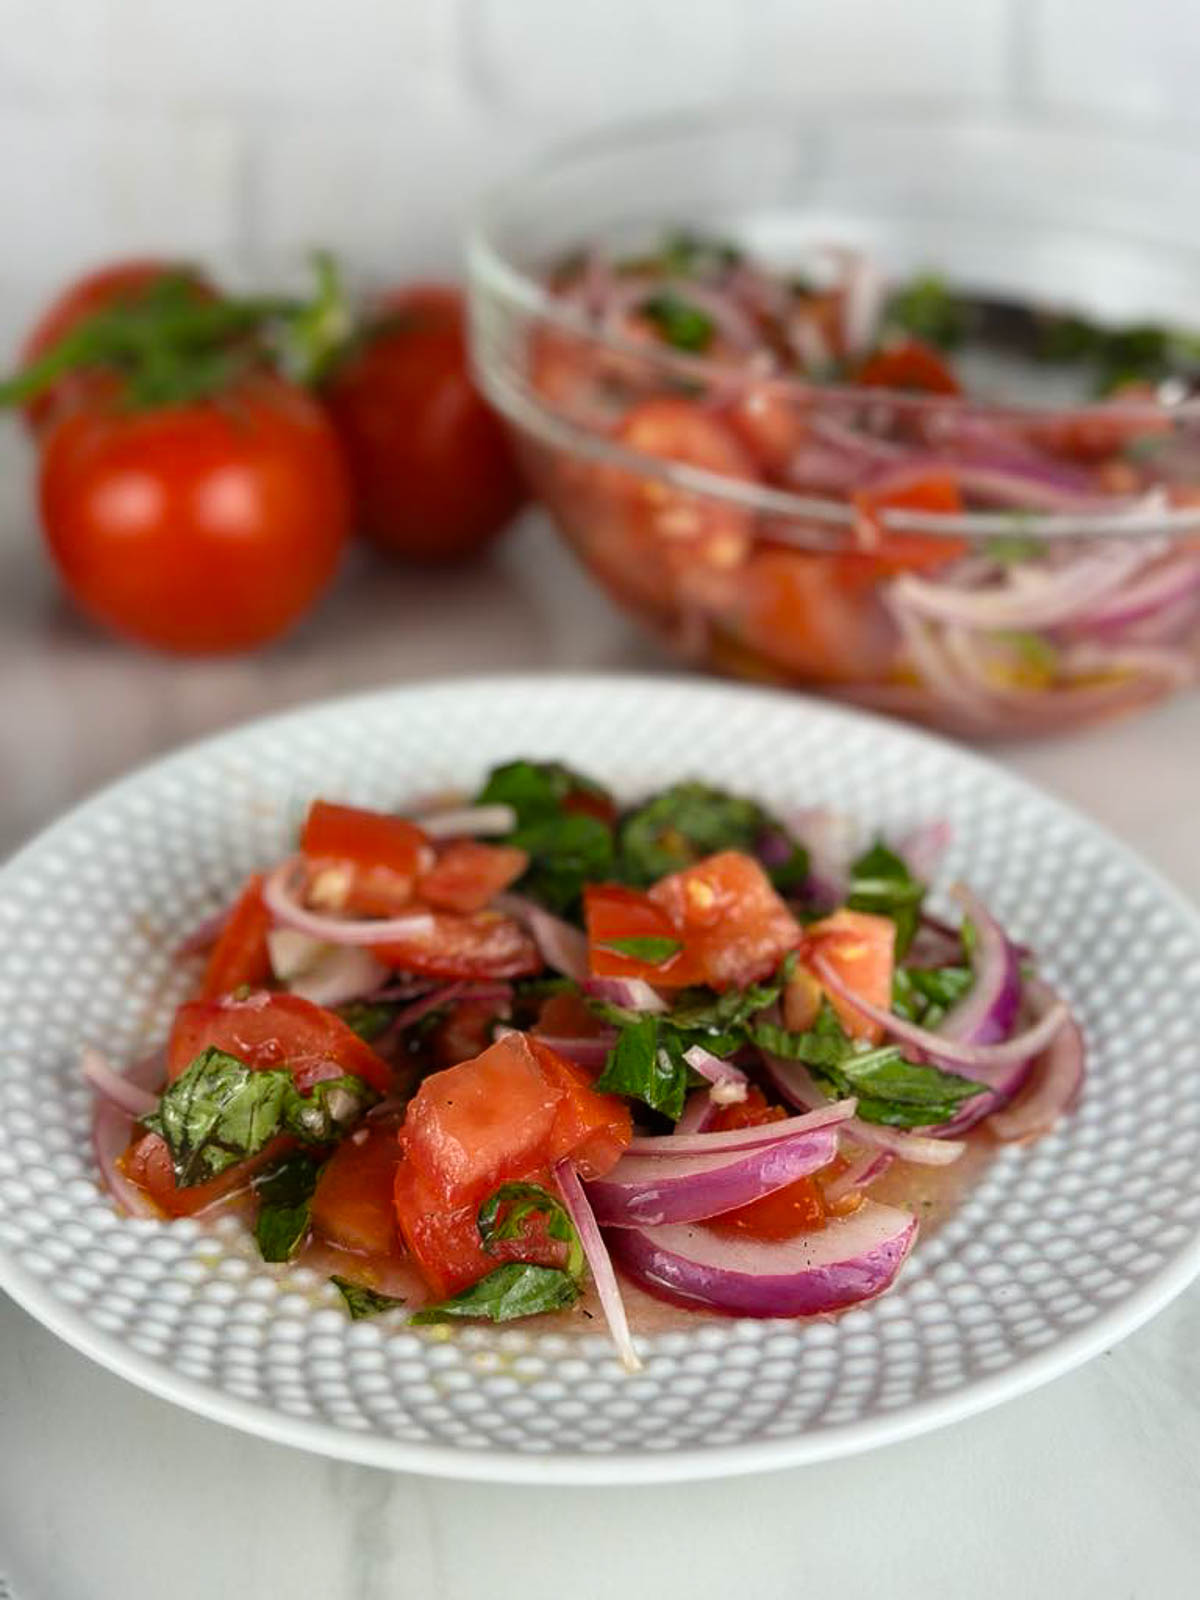 Tomato and onion salad with vinegar is a refreshing light lunch or delicious side dish or starter for any meal.